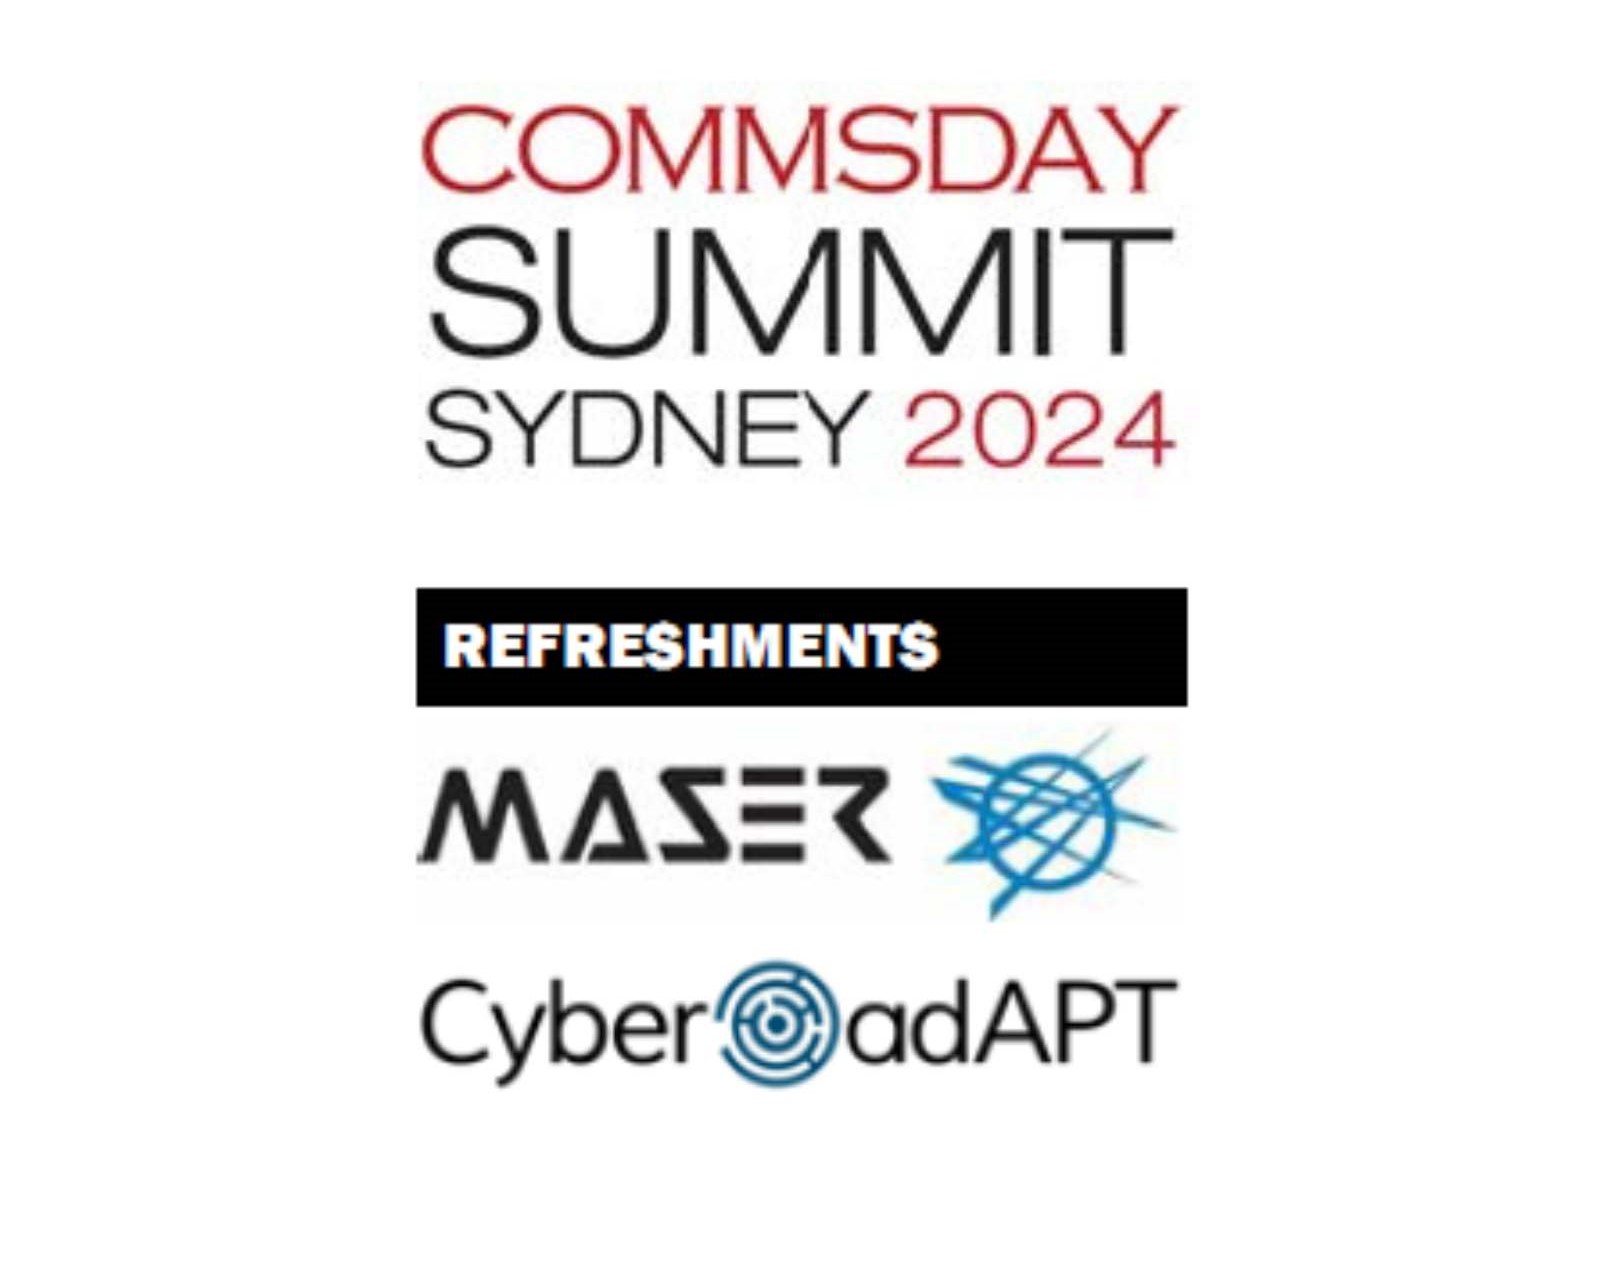 Maser and CyberAdapt partner to sponsor 2024 Commsday Summit